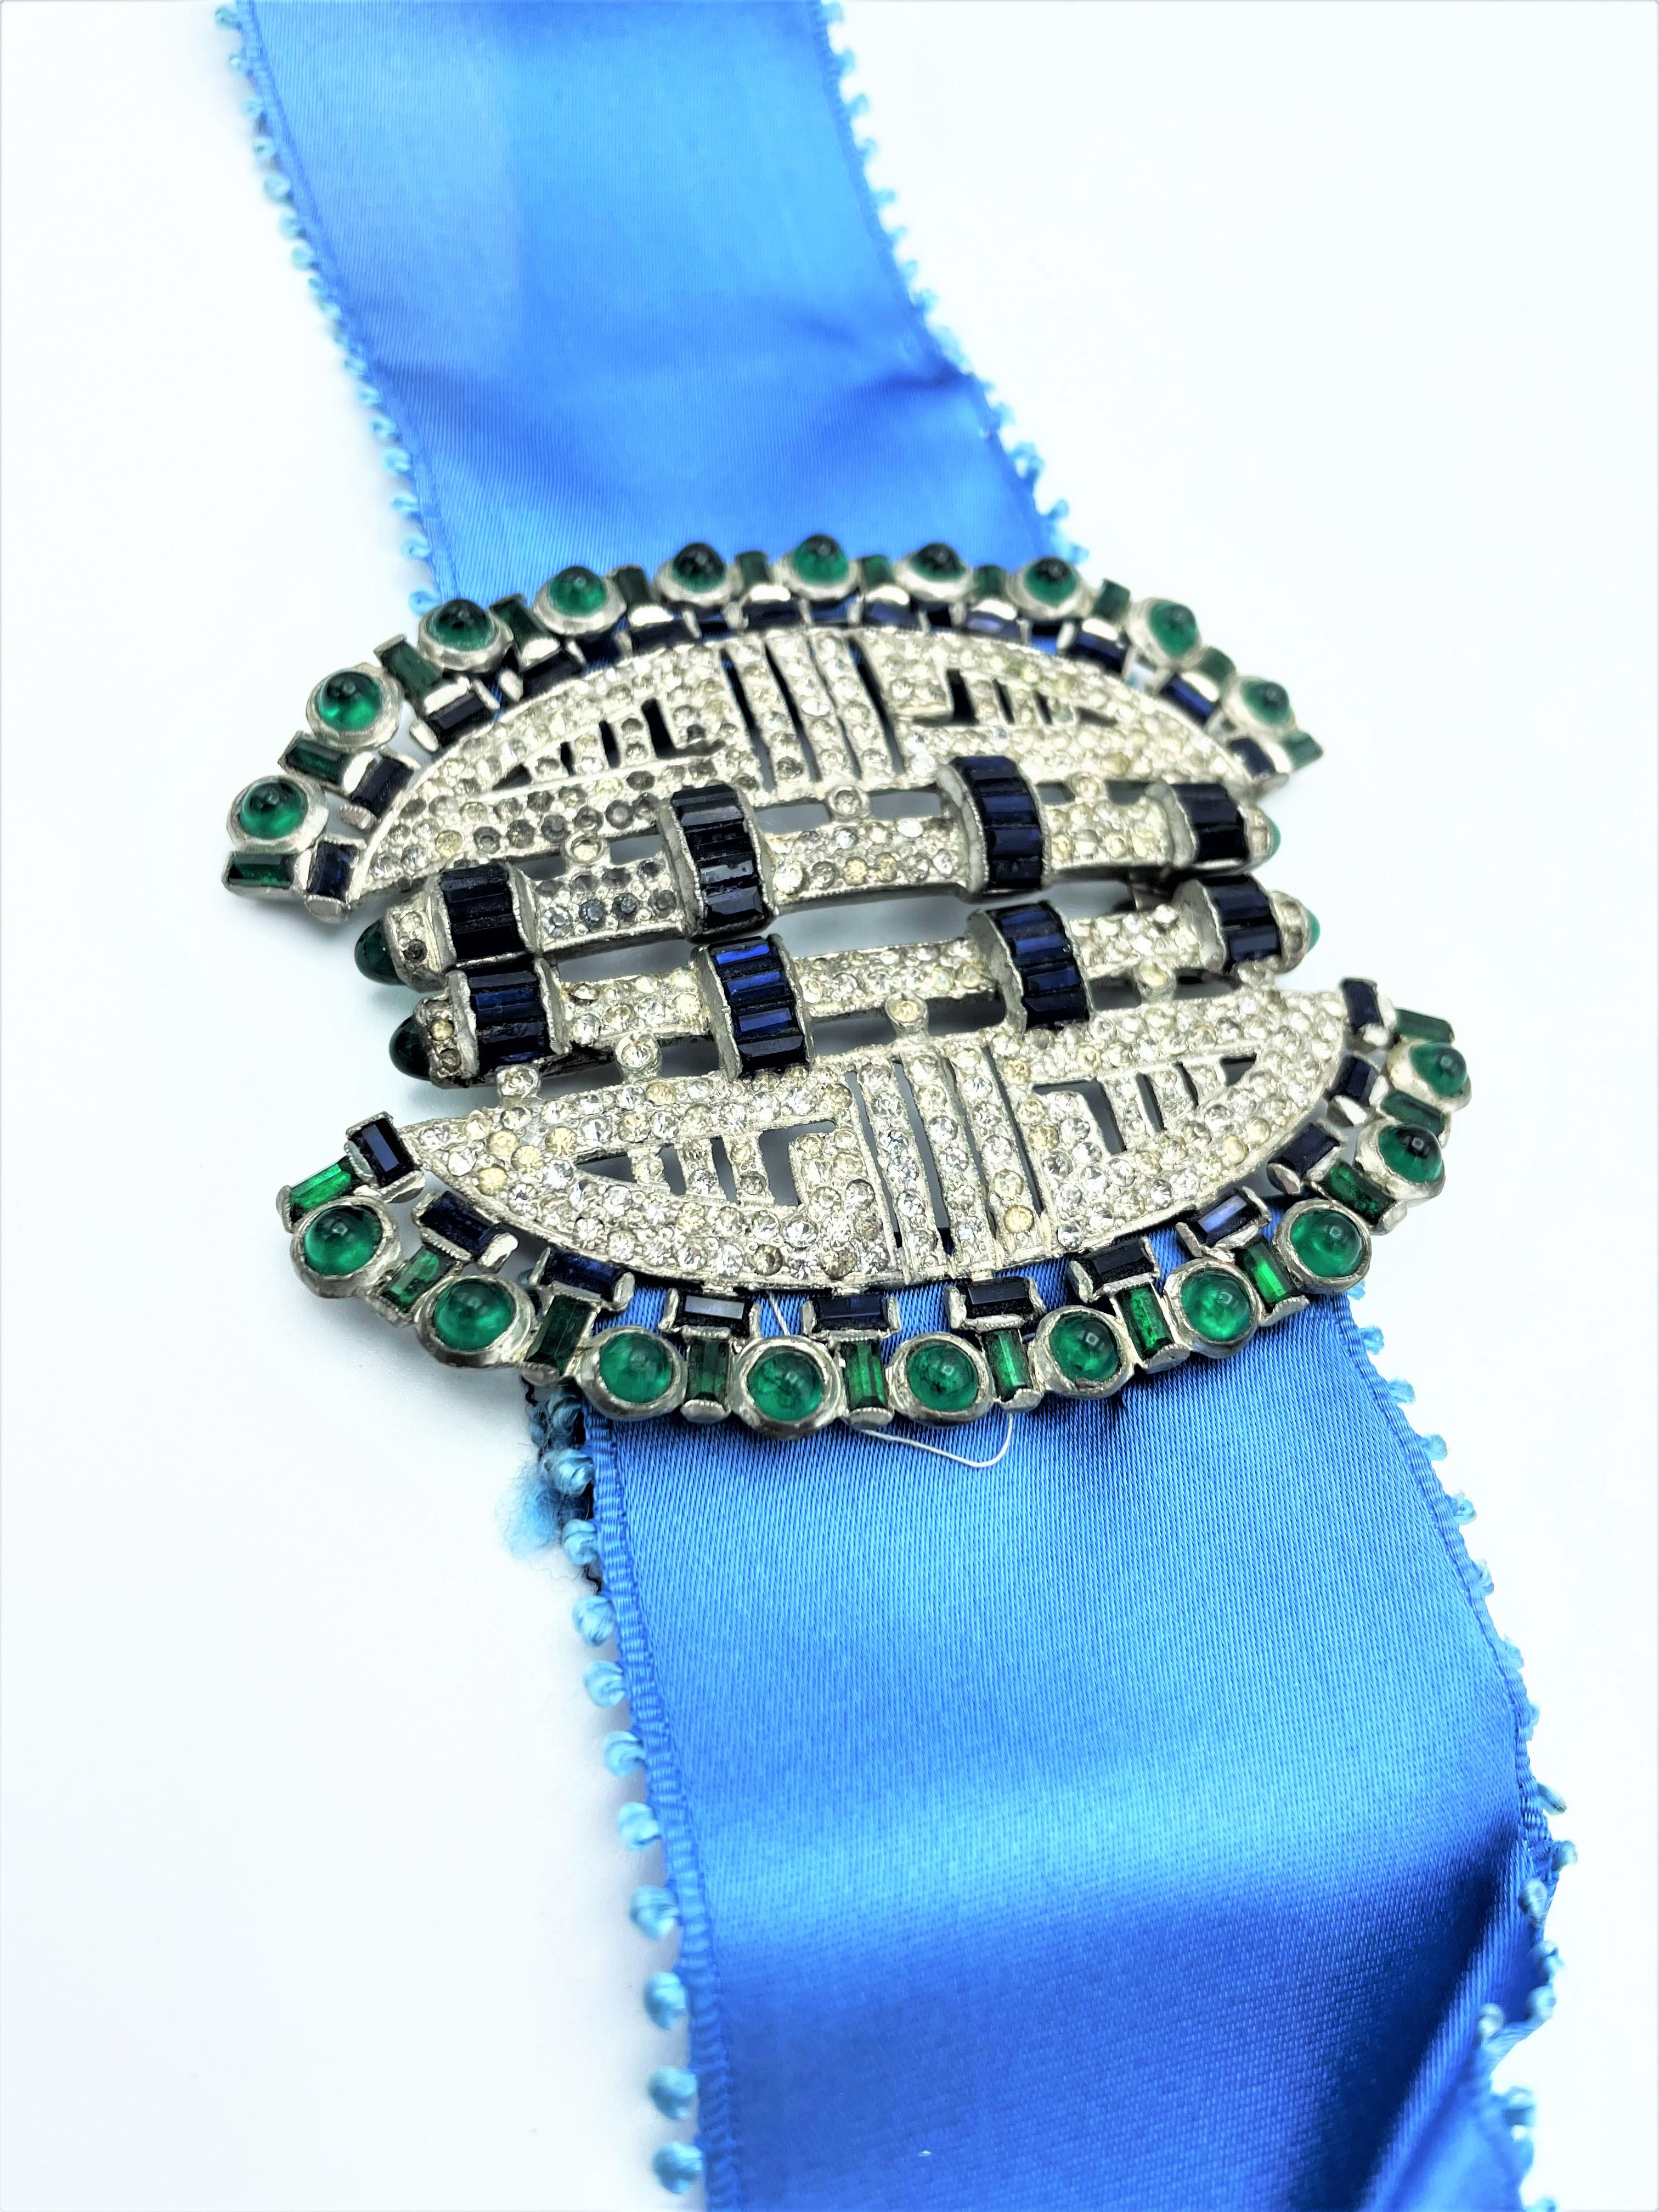 Very rare art deco belt buckle 1930s/40s France, fully set with rhinestones For Sale 3